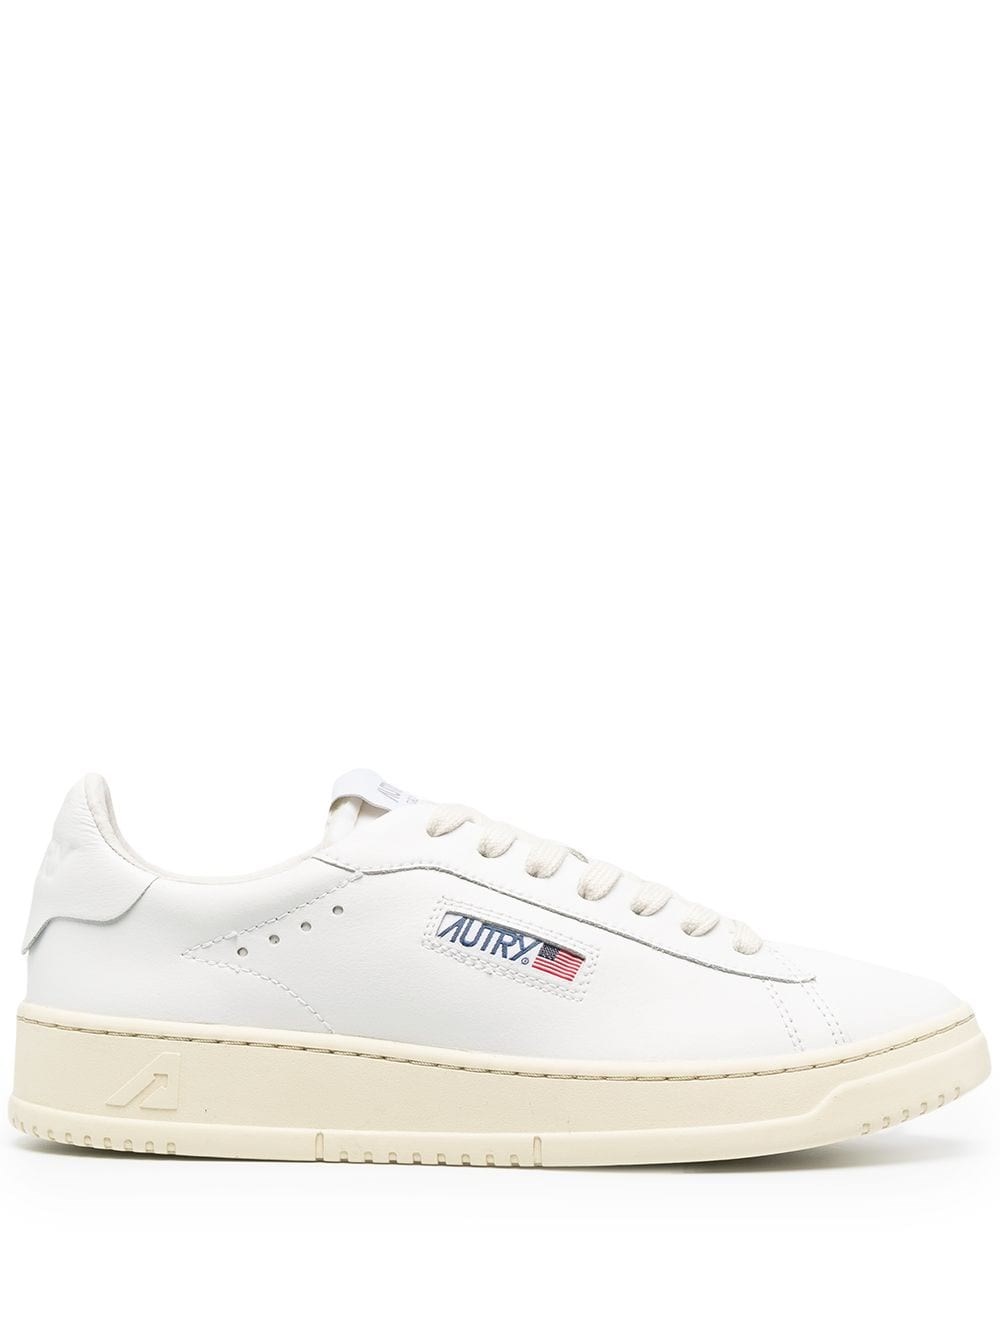 Autry Man Sneakers In White